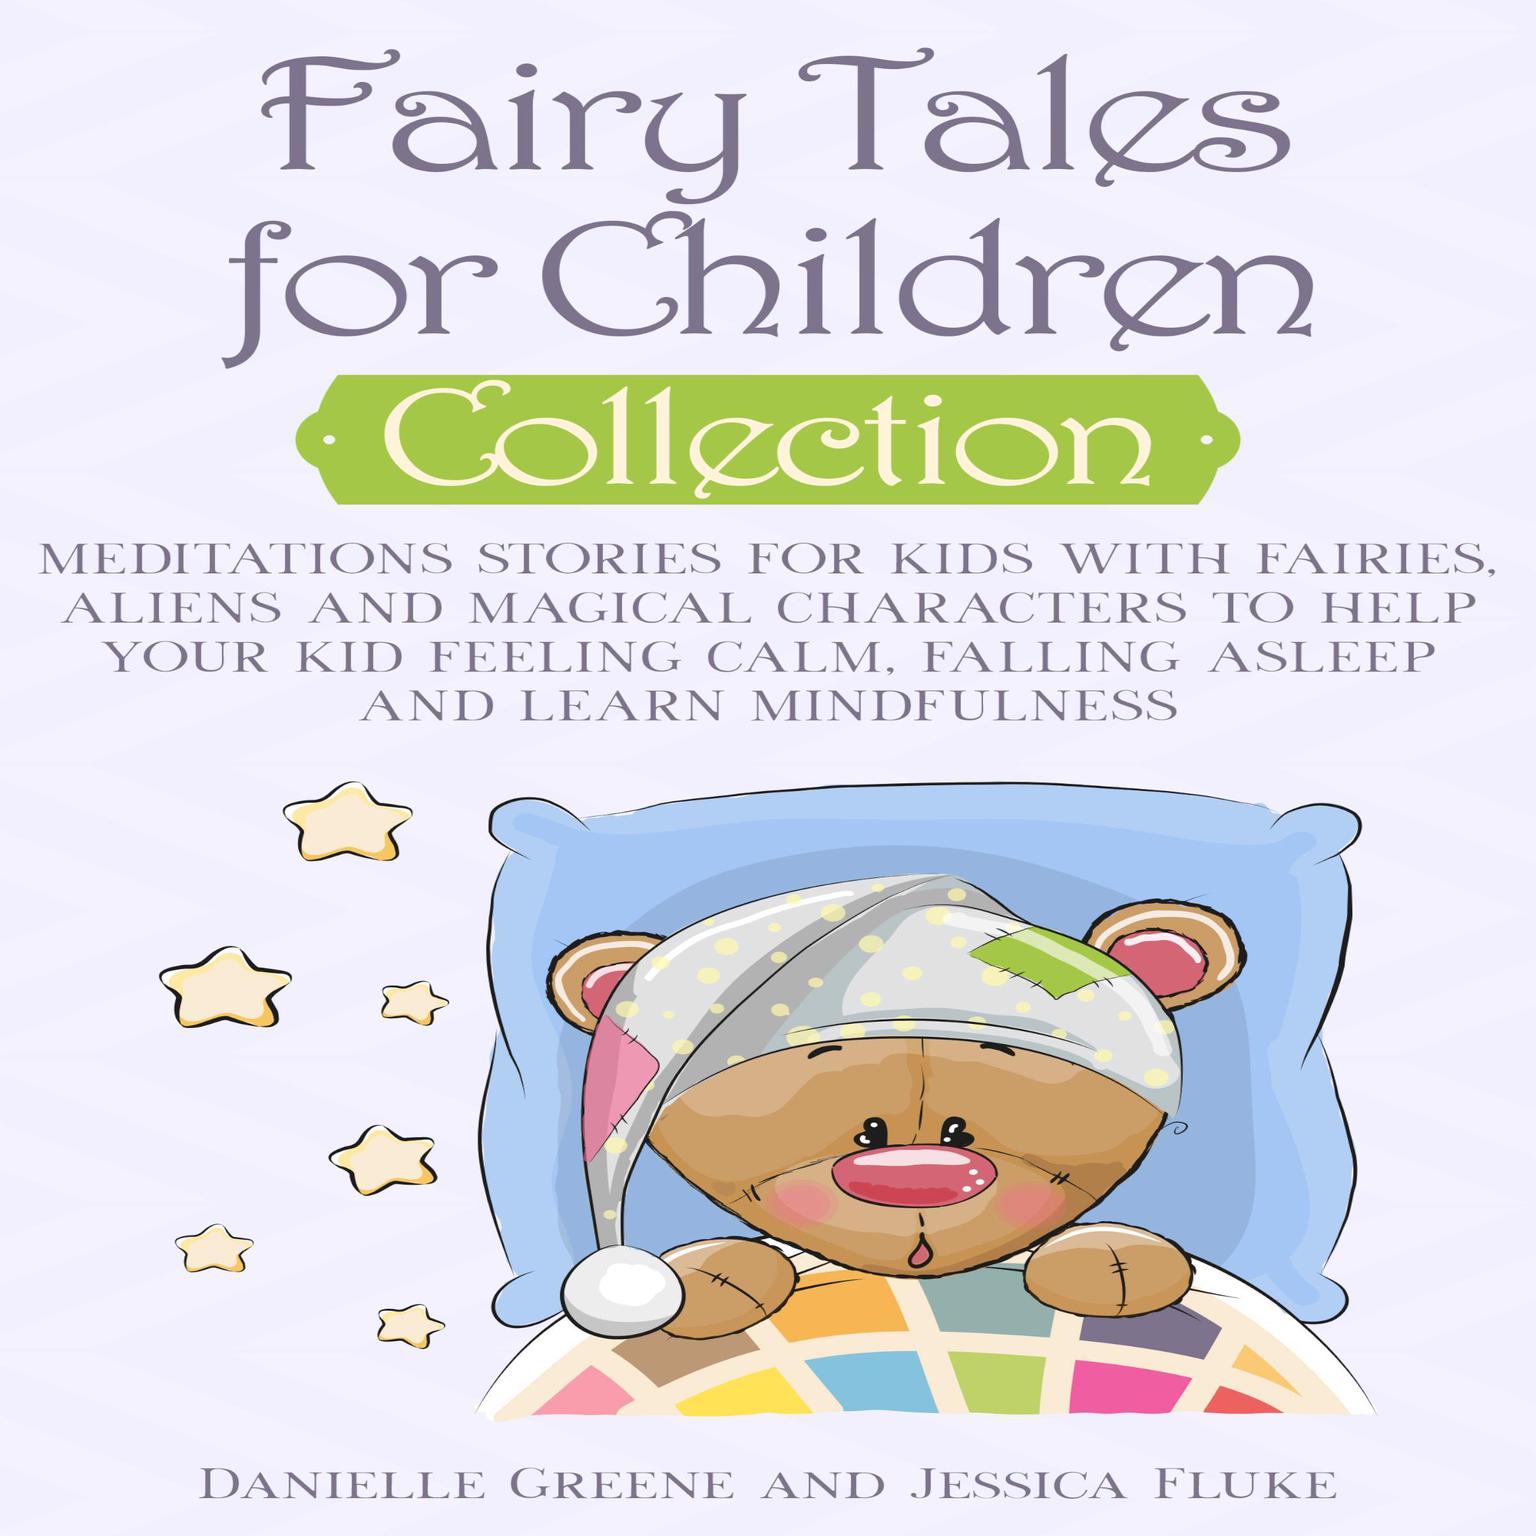 Fairy Tales for Children Collection: Meditations Stories for Kids with Fairies, Aliens and Magical Characters to Help Your Kid Feeling Calm, Falling Asleep and Learn Mindfulness Audiobook, by Danielle Greene